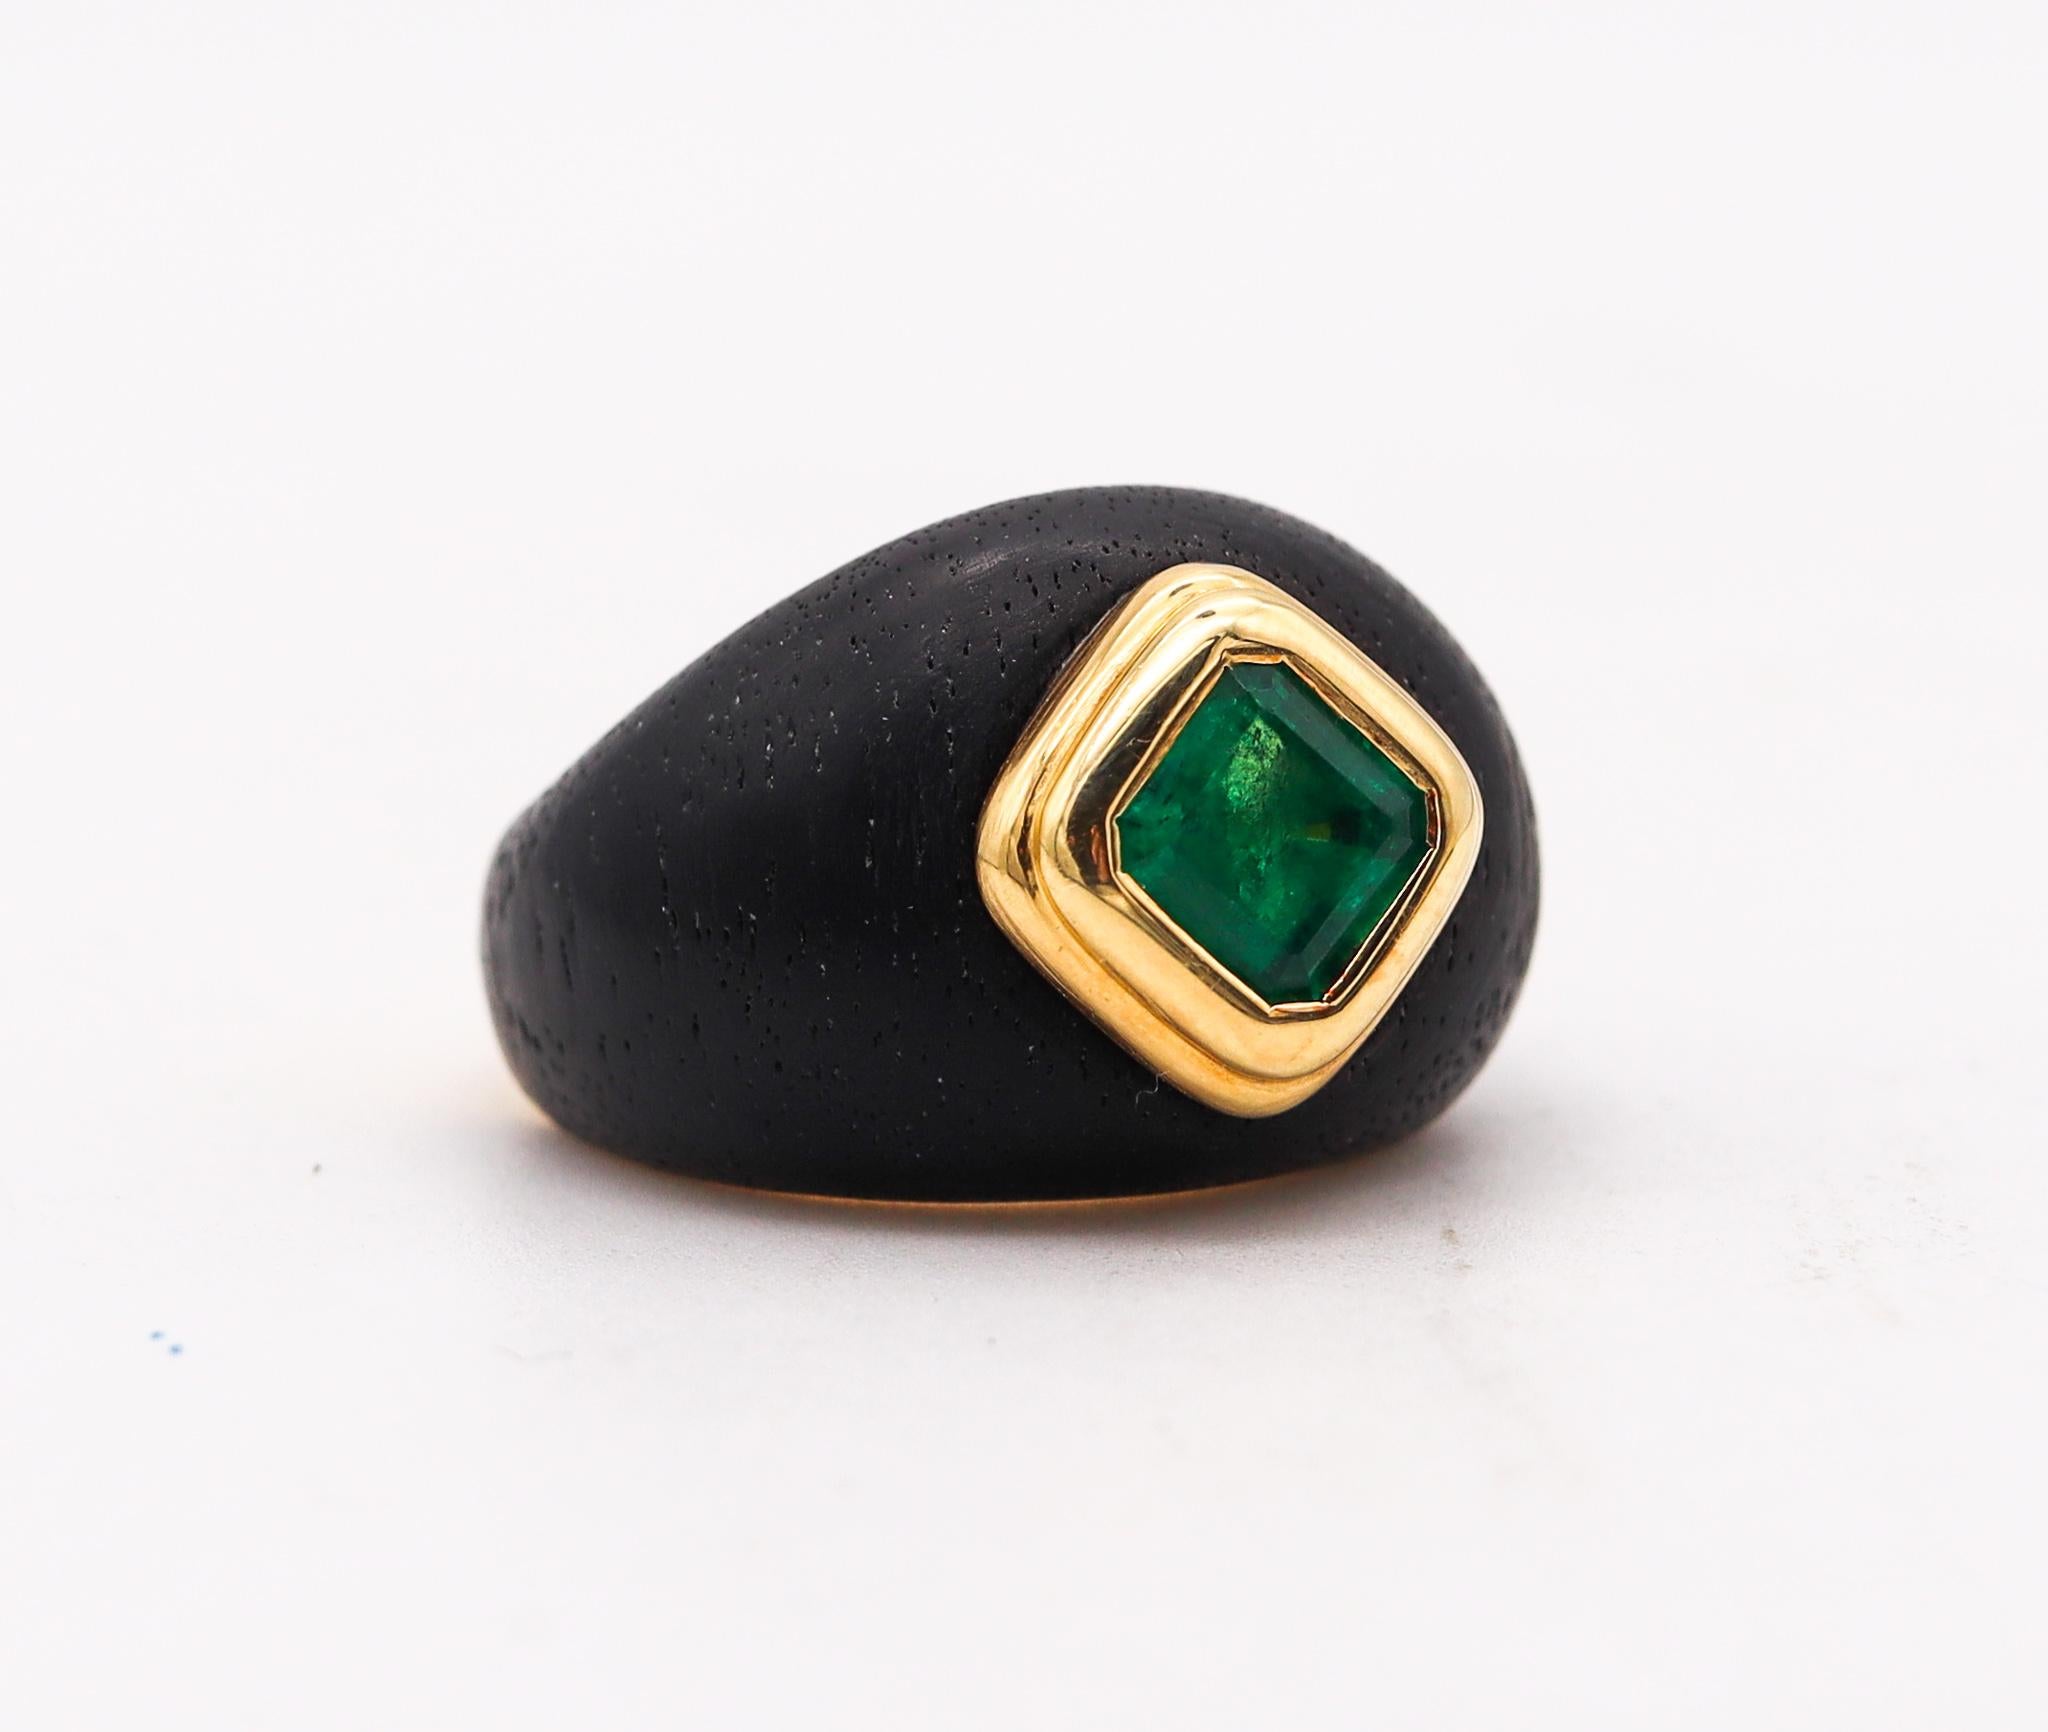 Modernist Rene Boivin 1973 Paris Ebony Wood Cocktail Ring in 18Kt Gold & 1.77 Cts Emerald